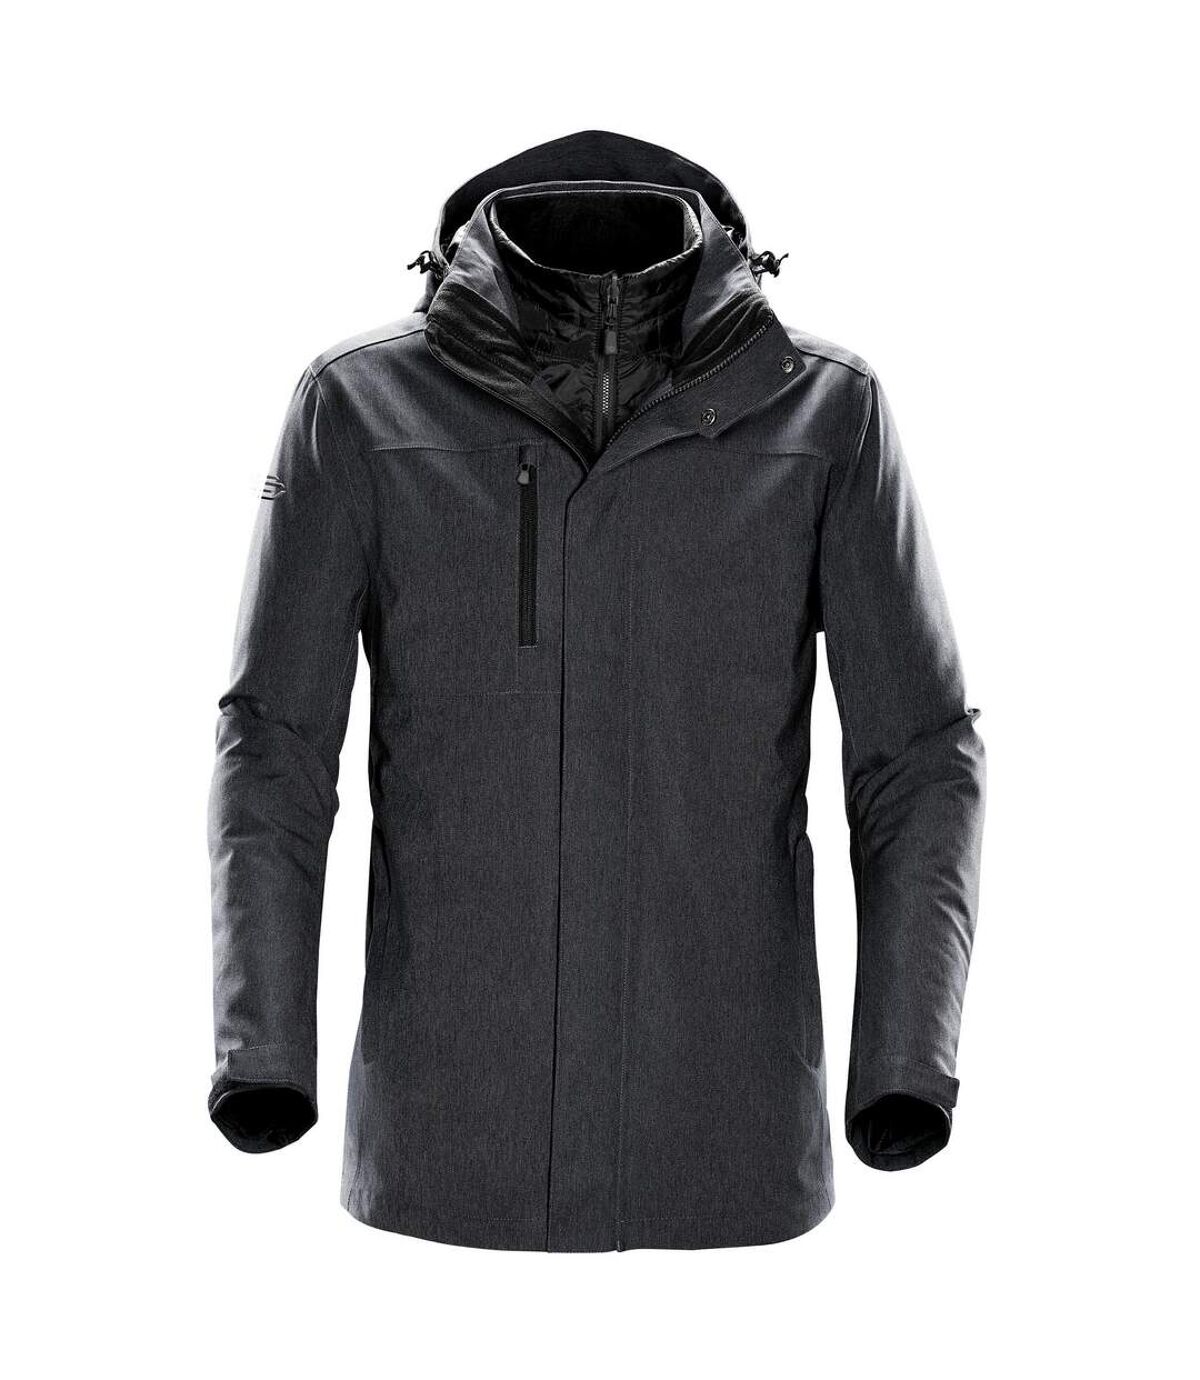 Stormtech Mens Avalanche System Jacket (Charcoal Twill) - UTBC4117